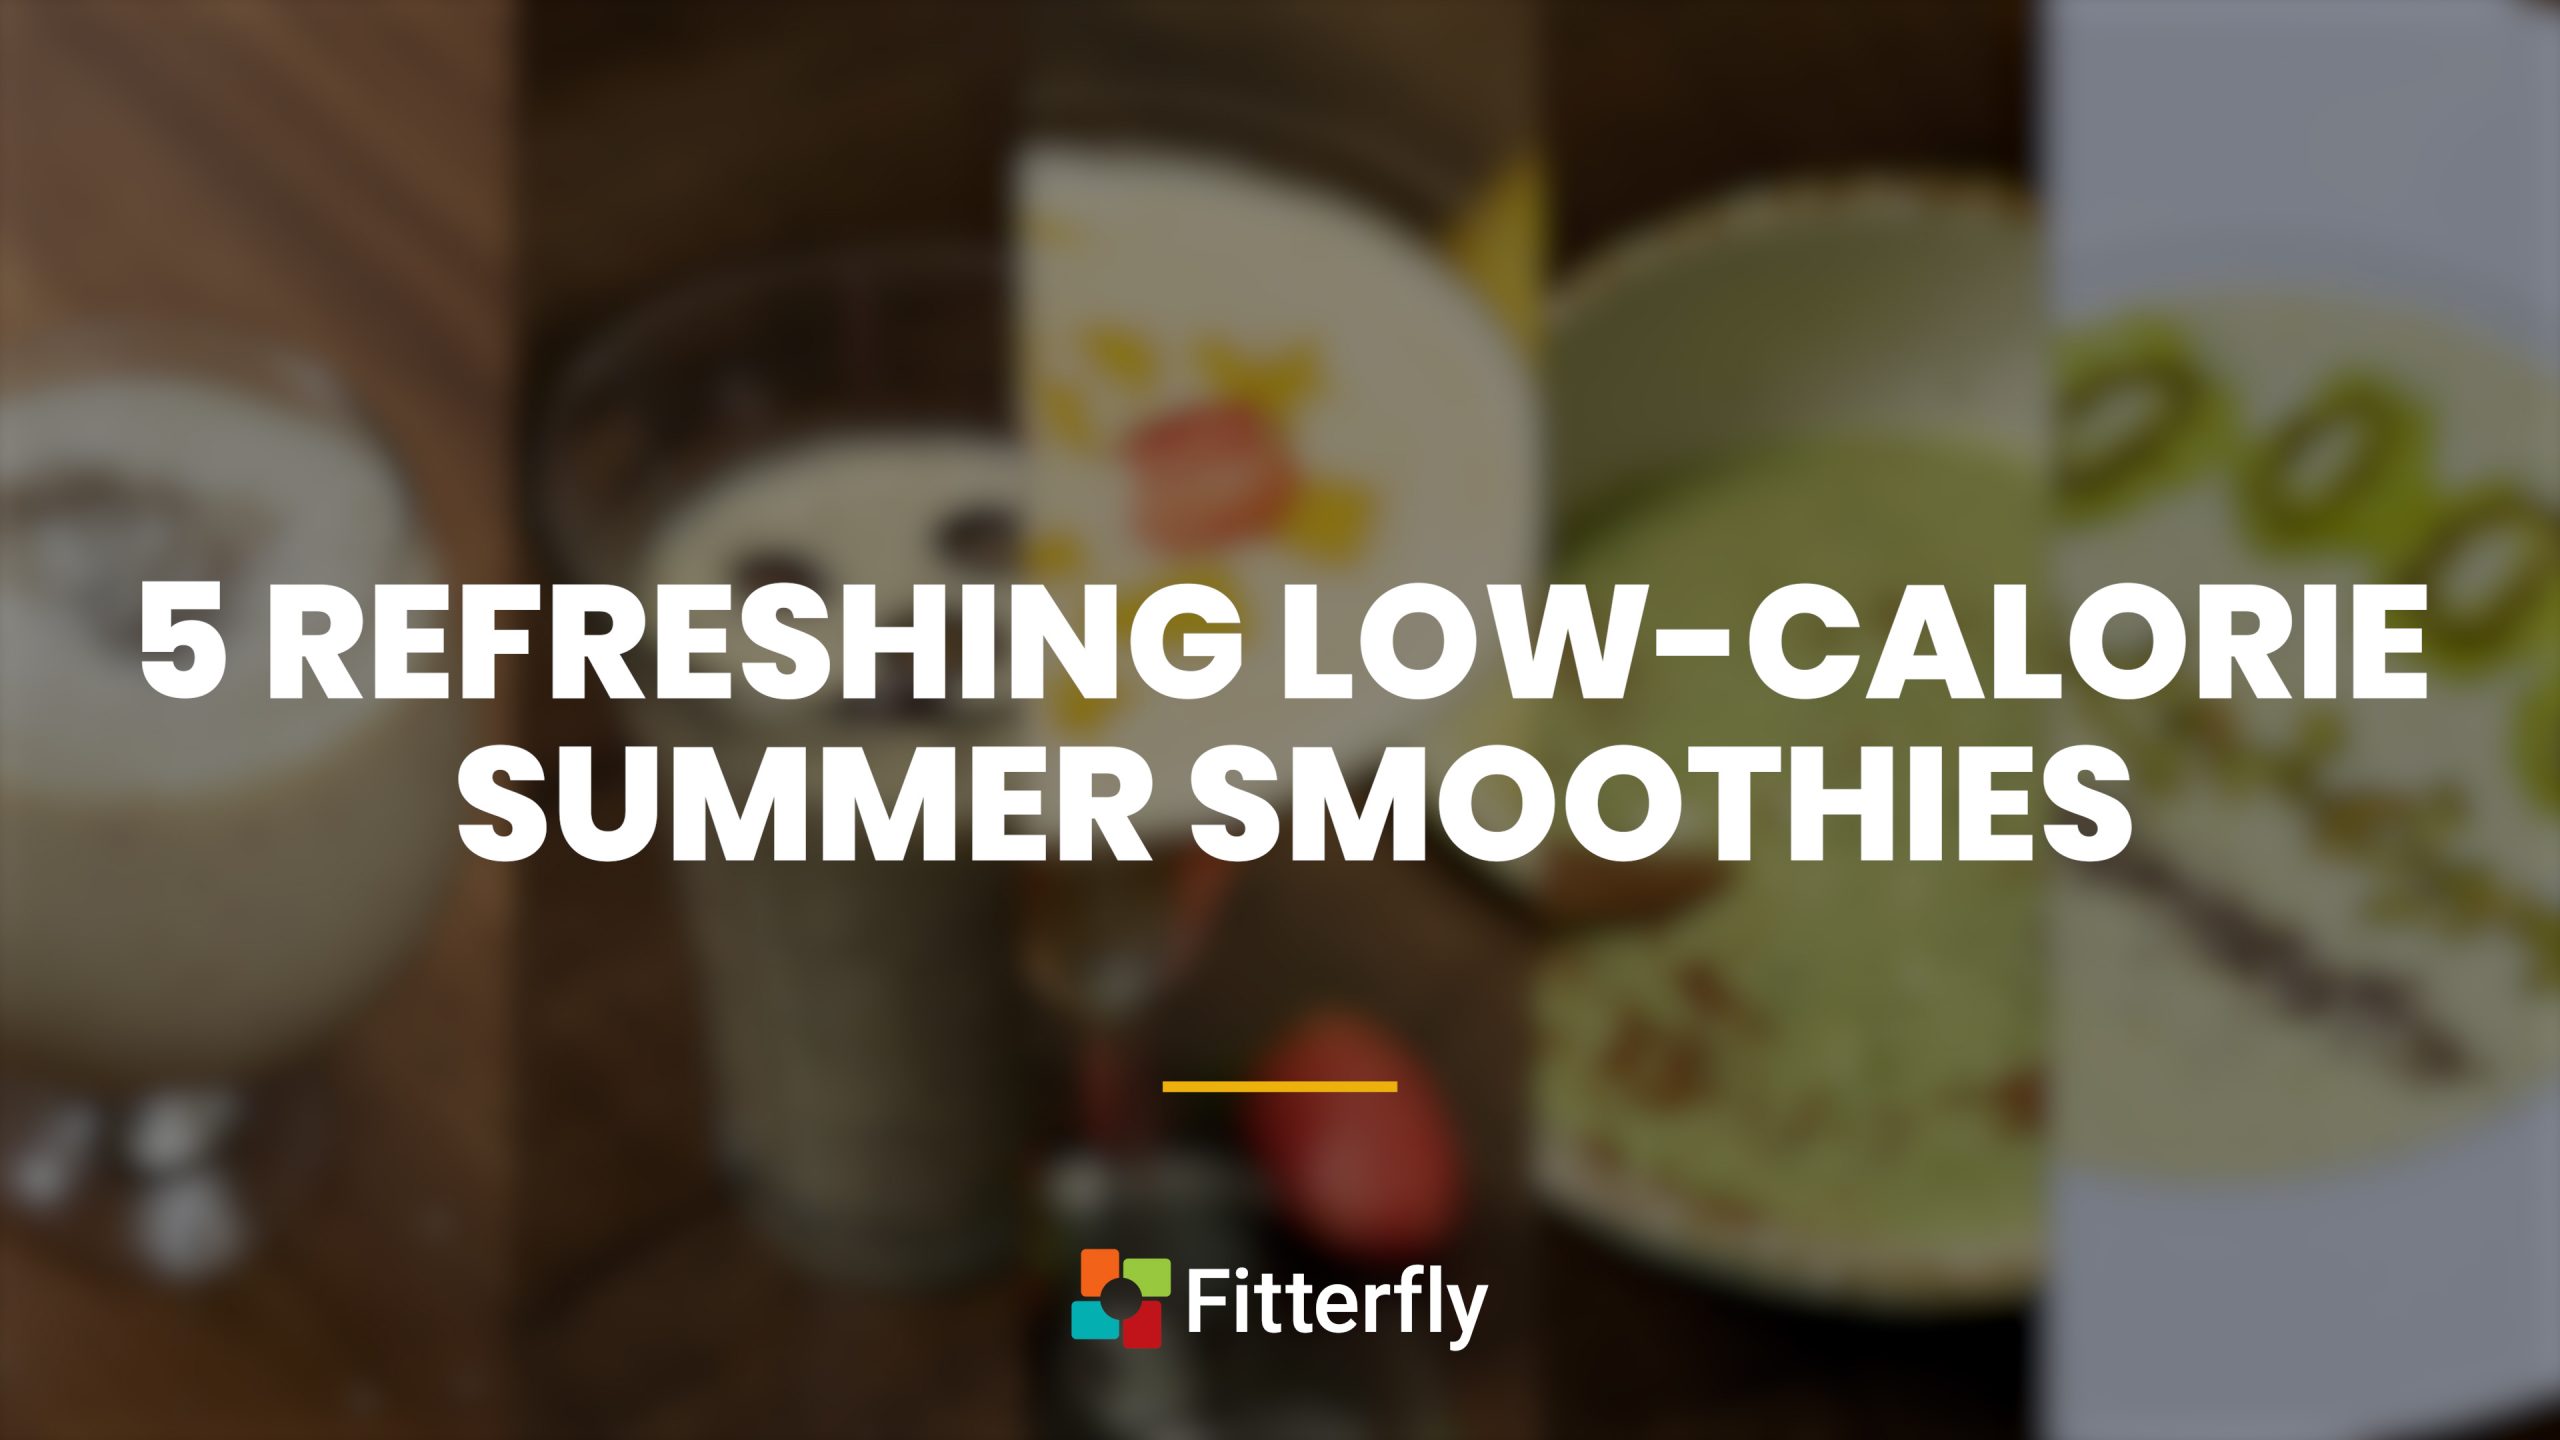 5 refreshing low-calorie summer smoothies